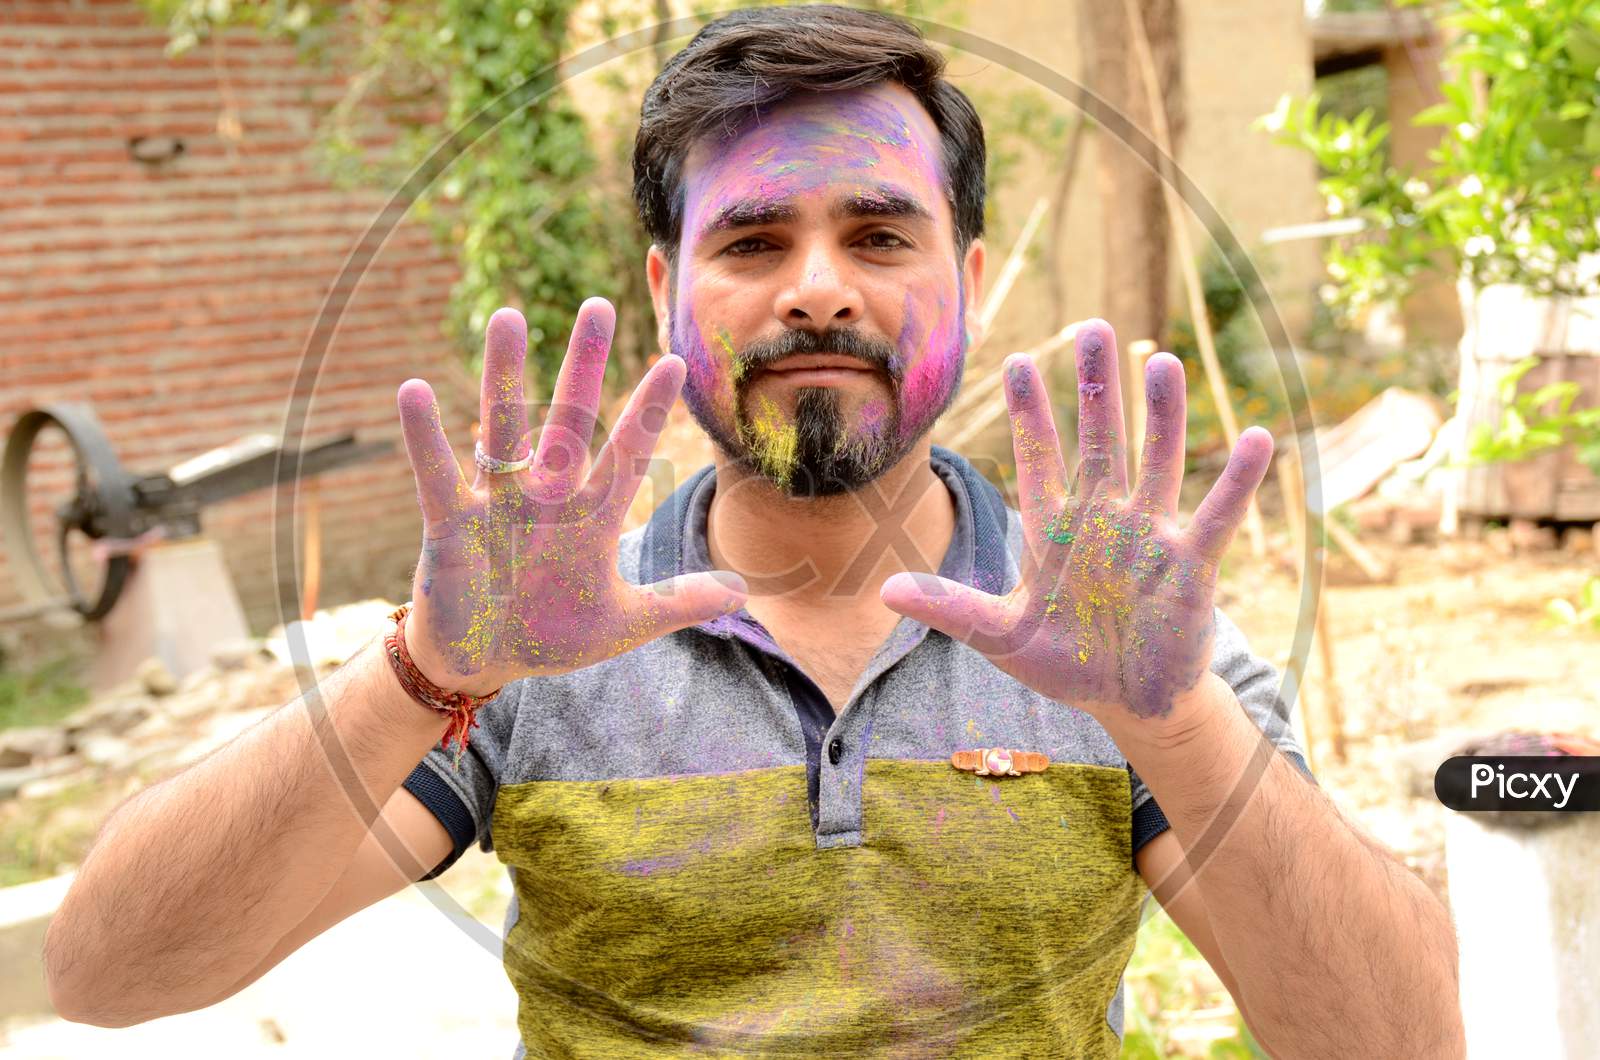 The Young Man Paint On The Face With Hand Over Out Of The Focus Green Brown Background.